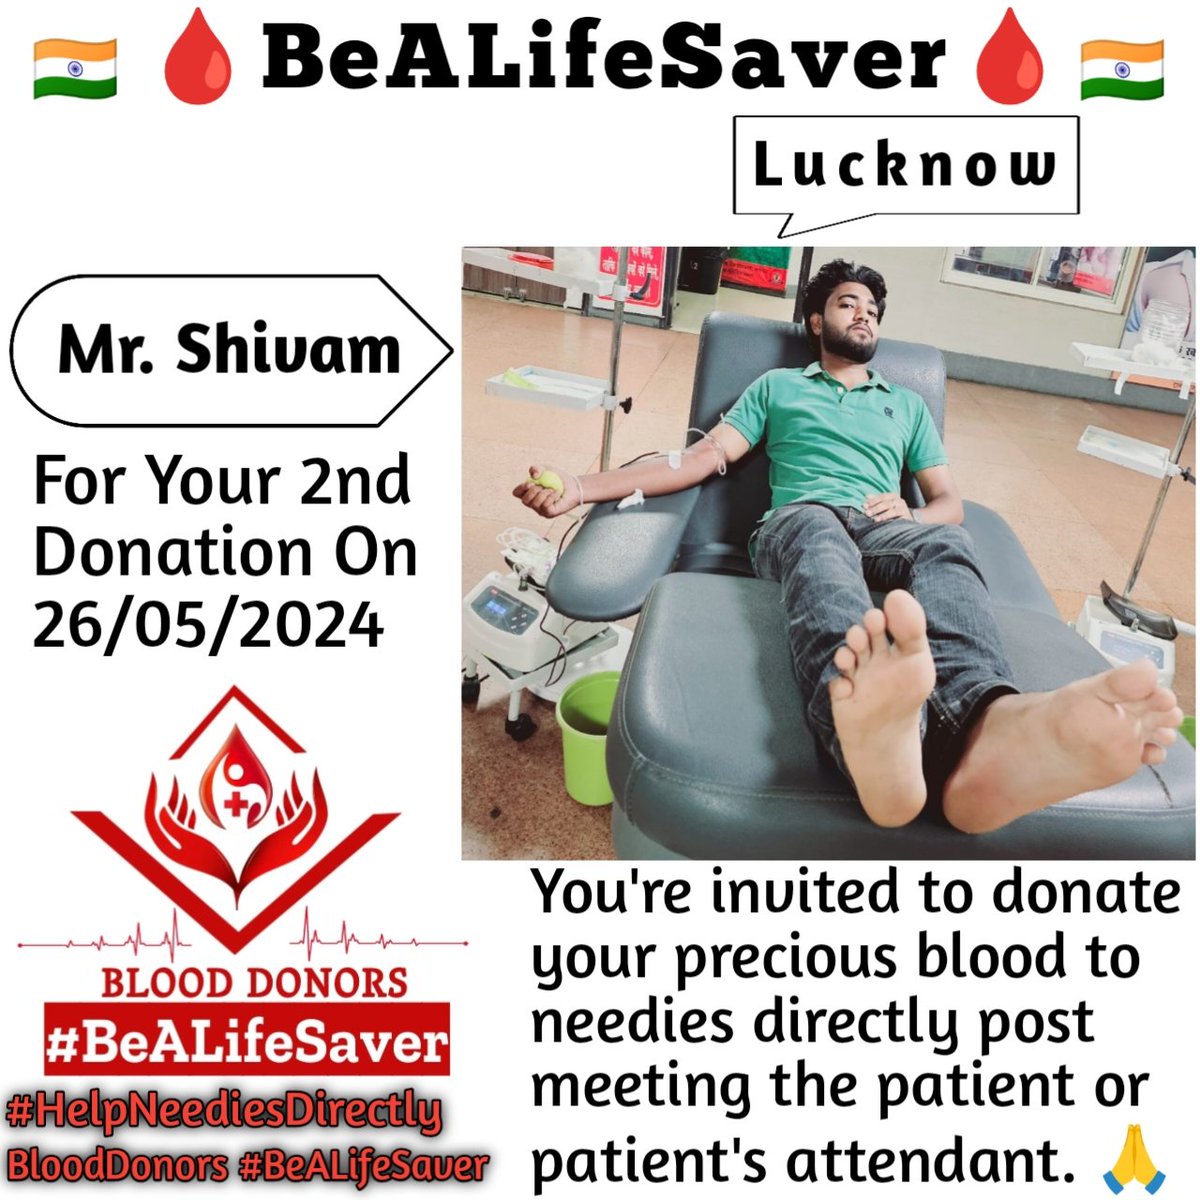 🙏 Congrats For 2nd Blood Donation 🙏 Lucknow BeALifeSaver Kudos_Mr_Shivam_Ji Today's hero Mr. Shivam Ji donated blood in Lucknow for the 2nd Time for one of the needies. Heartfelt Gratitude and Respect to Shivam Ji for his blood donation for Patient admitted in Lucknow.